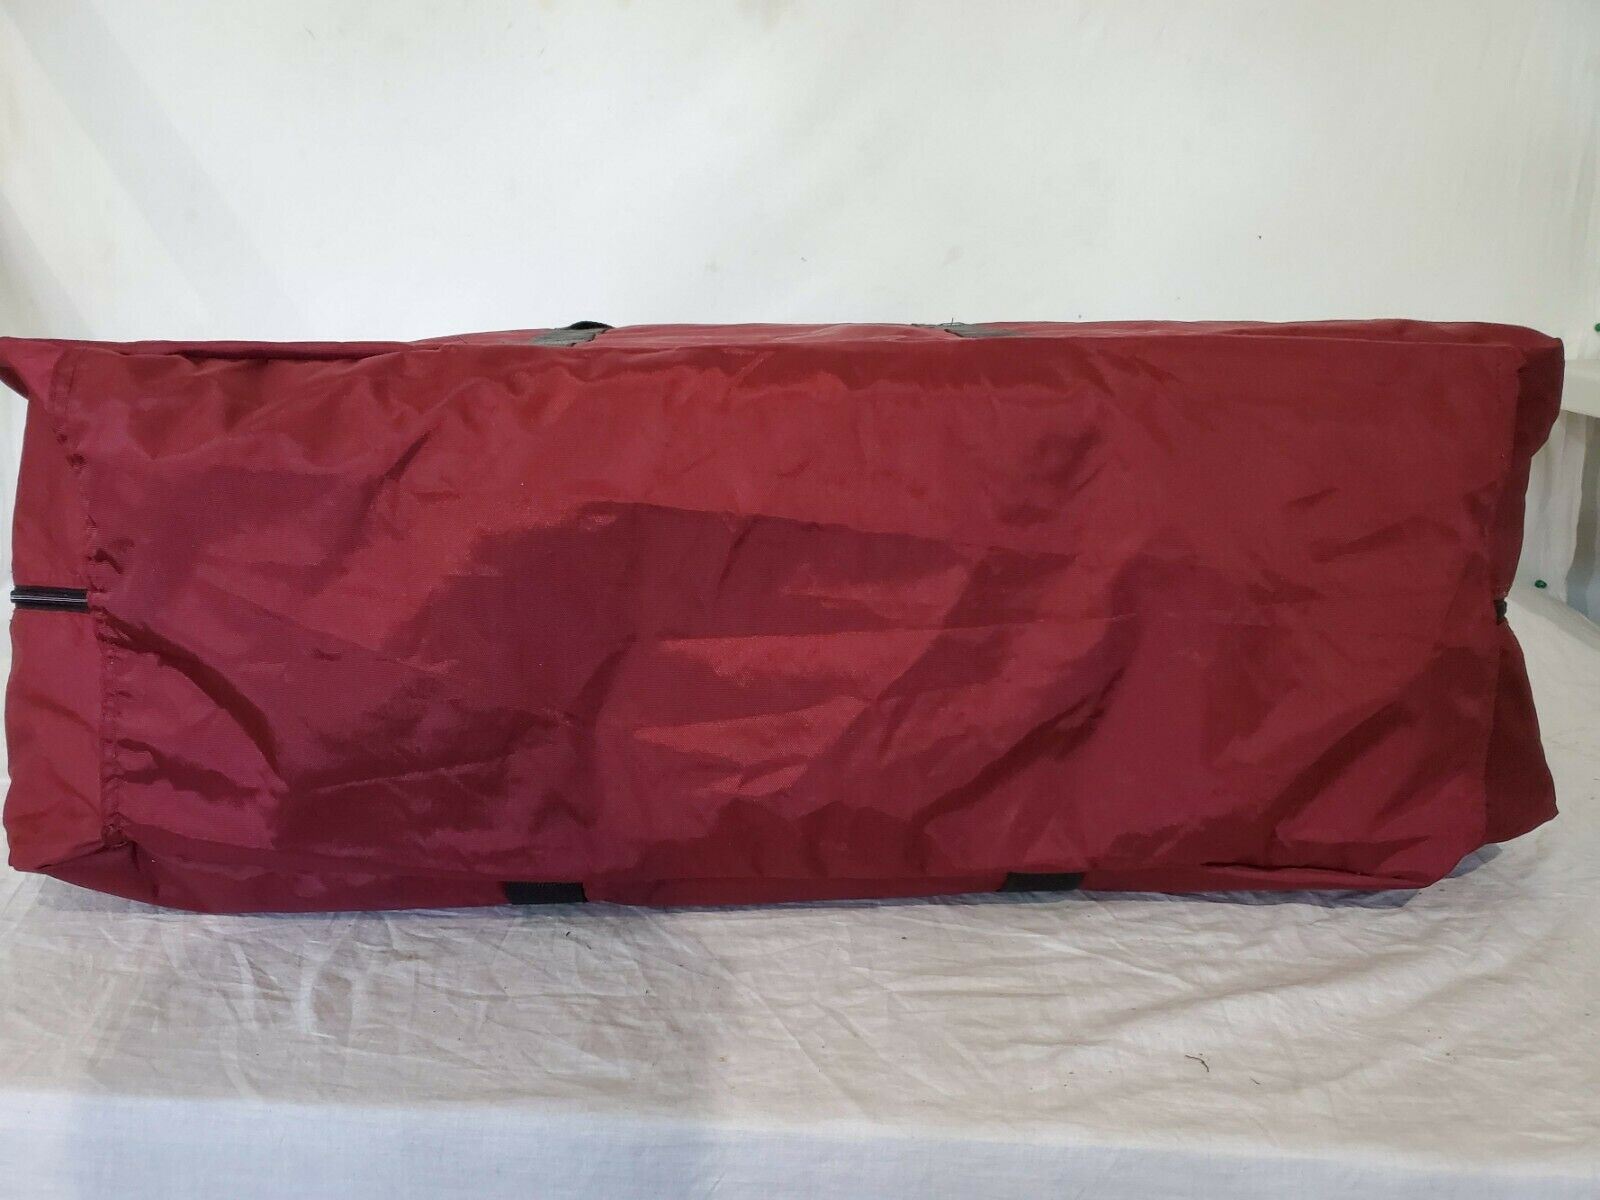 Marc New York Carry A Ton Check-In Duffle Bag Red Travel Luggage Lightweight 32